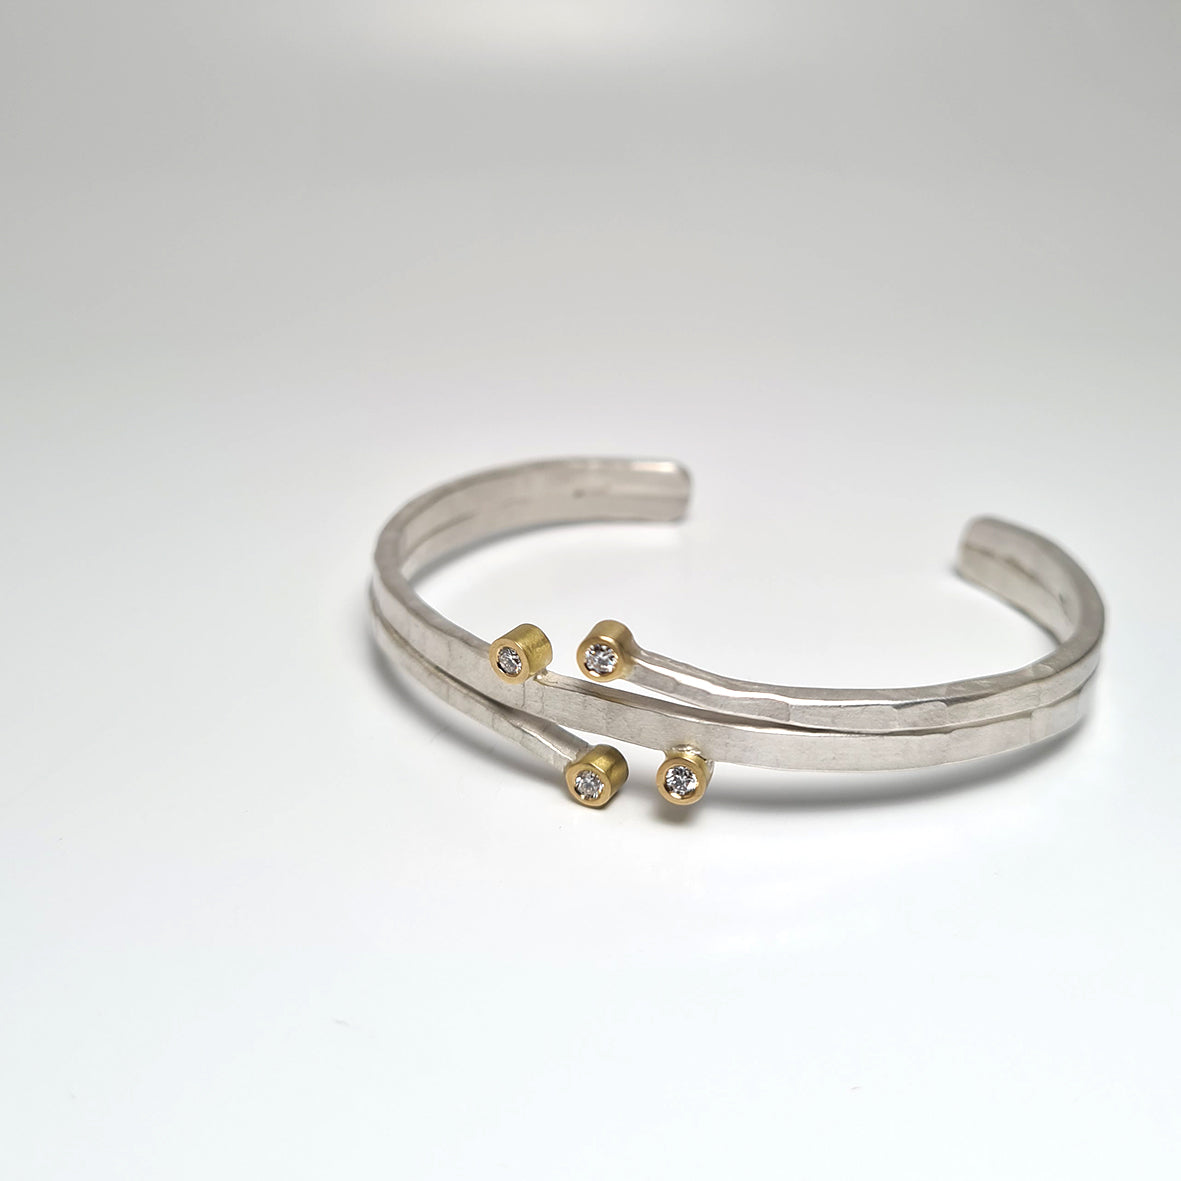 Four bracelet from the forJa collection.